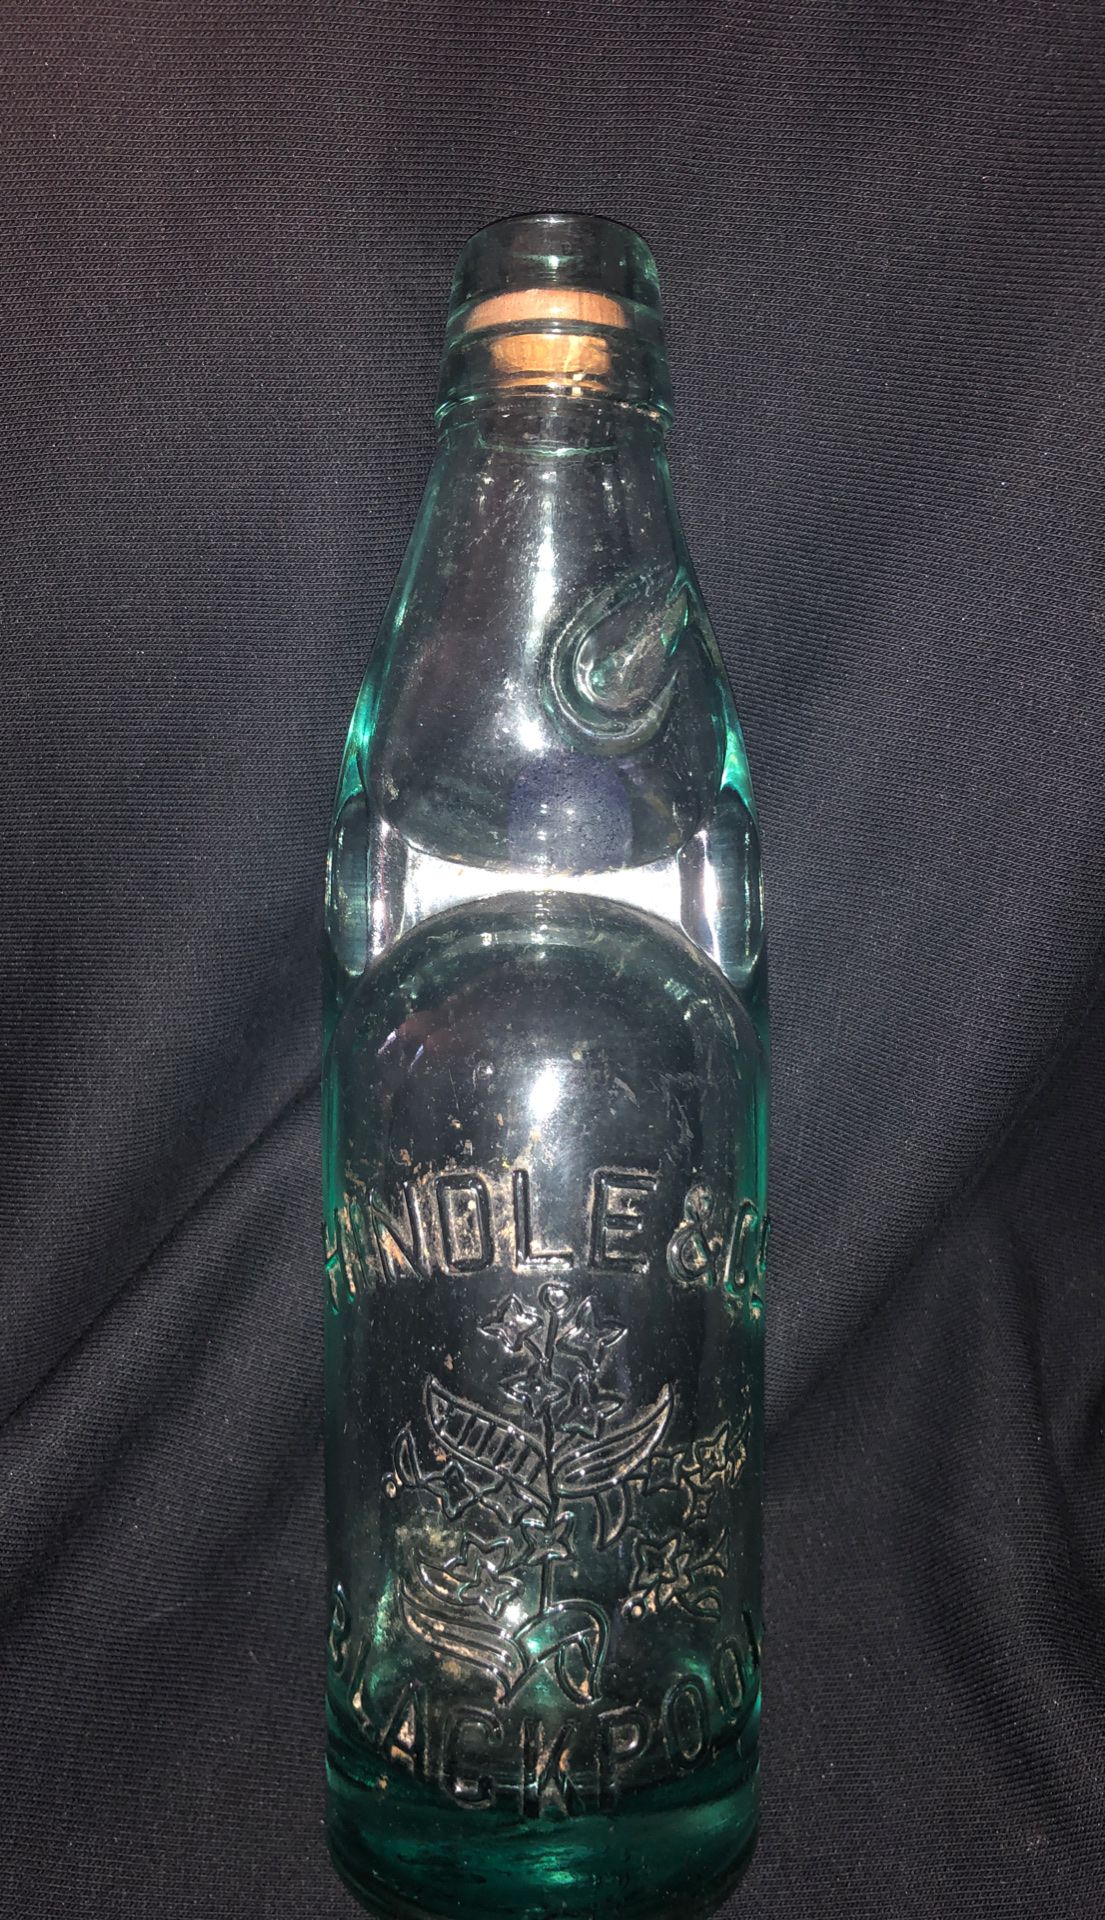 Antique Hindle & Co. Blackpool glass bottle w/ marble inside!